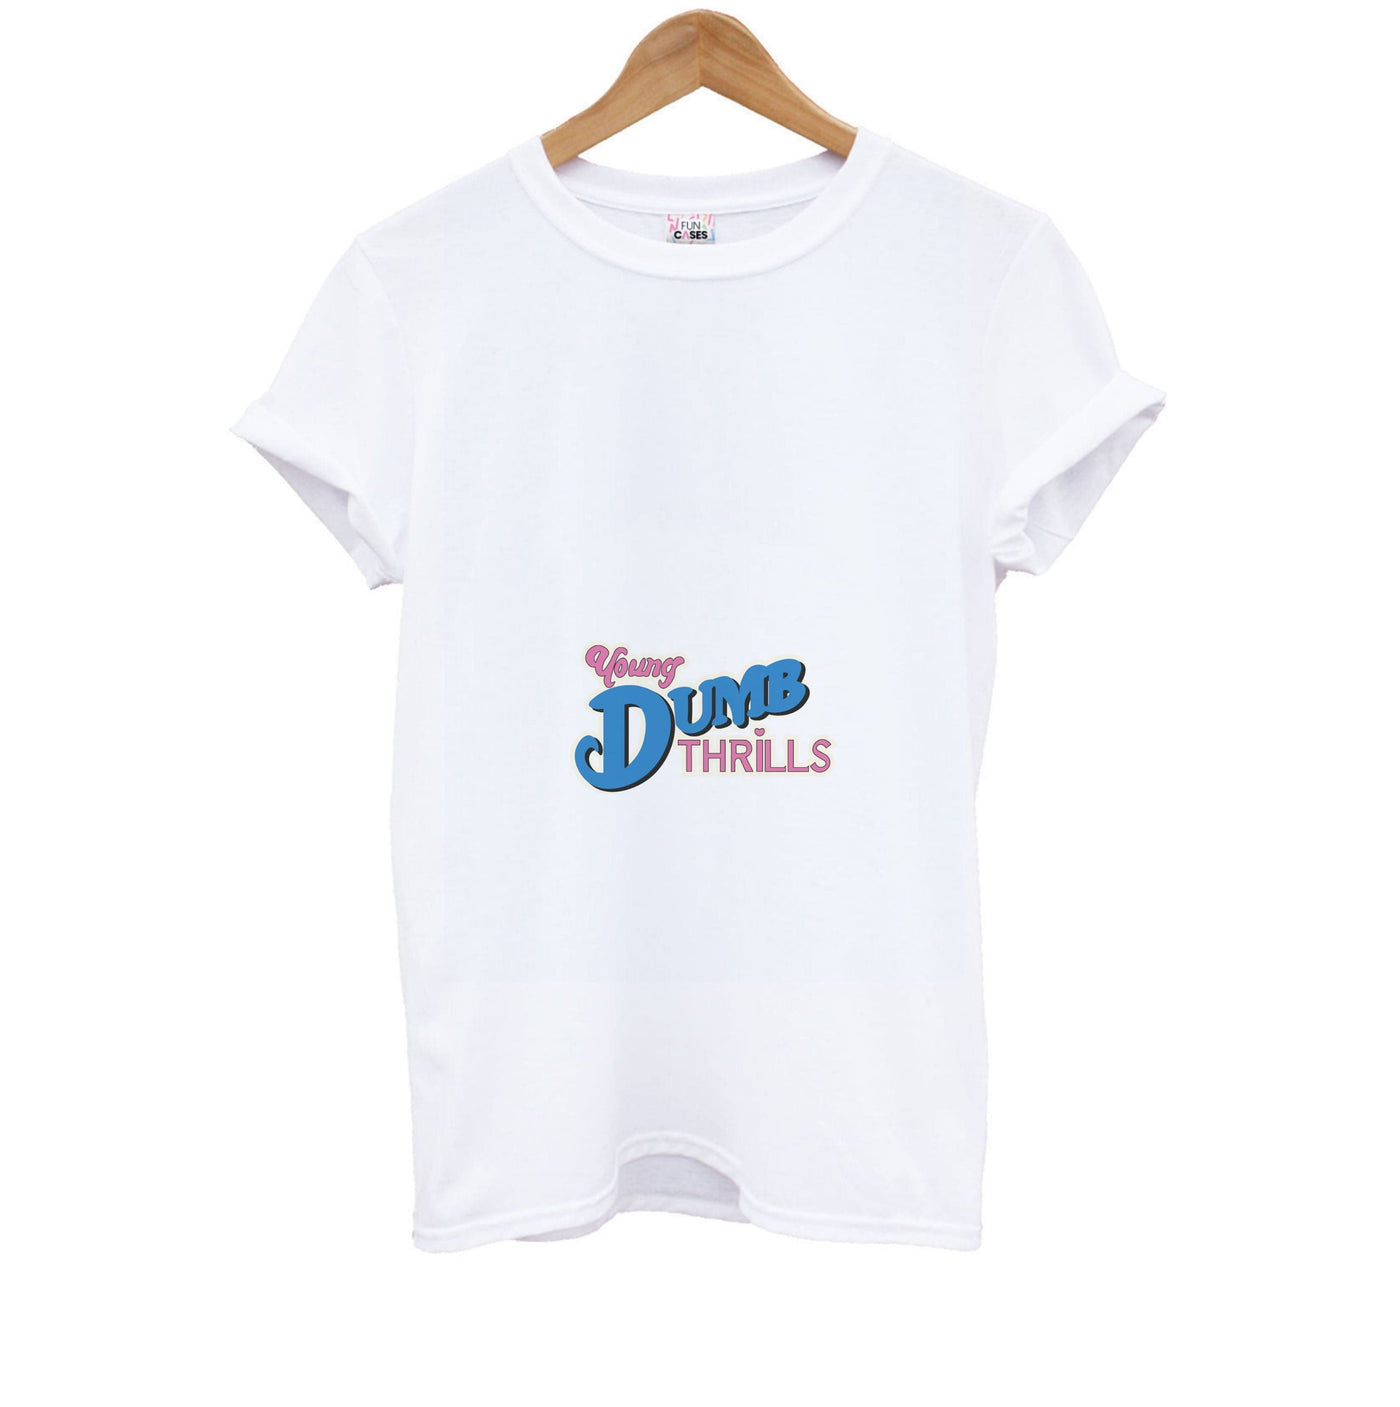 Young Dumb Thrills - Obviously - McFly Kids T-Shirt